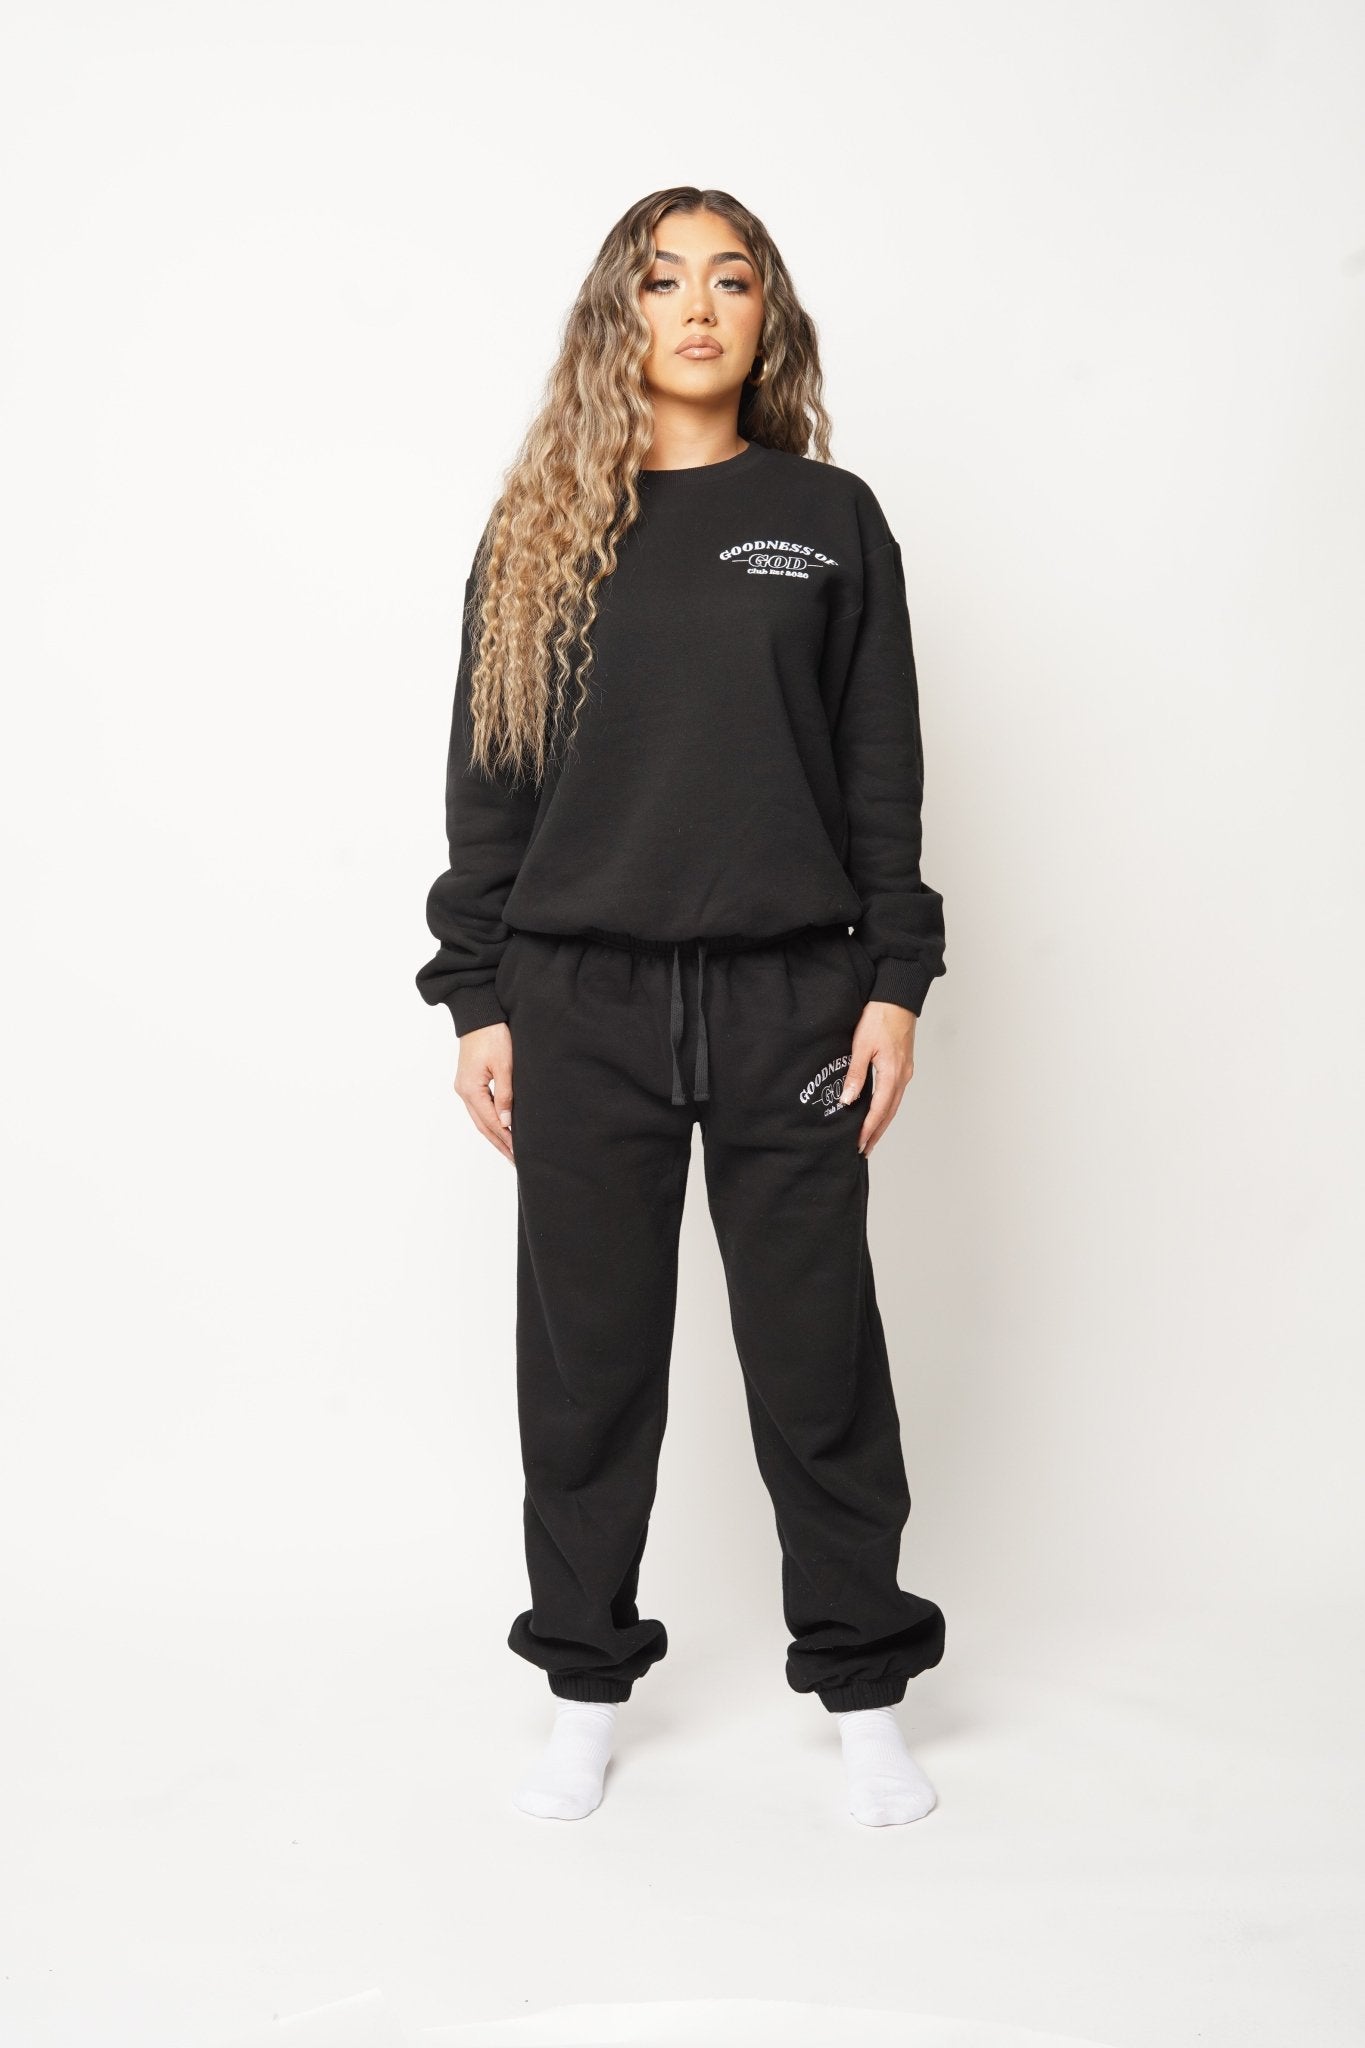 Load image into Gallery viewer, Black Sweatpants with Goodness of God embroidery logo. The perfect Christian clothing for you.
